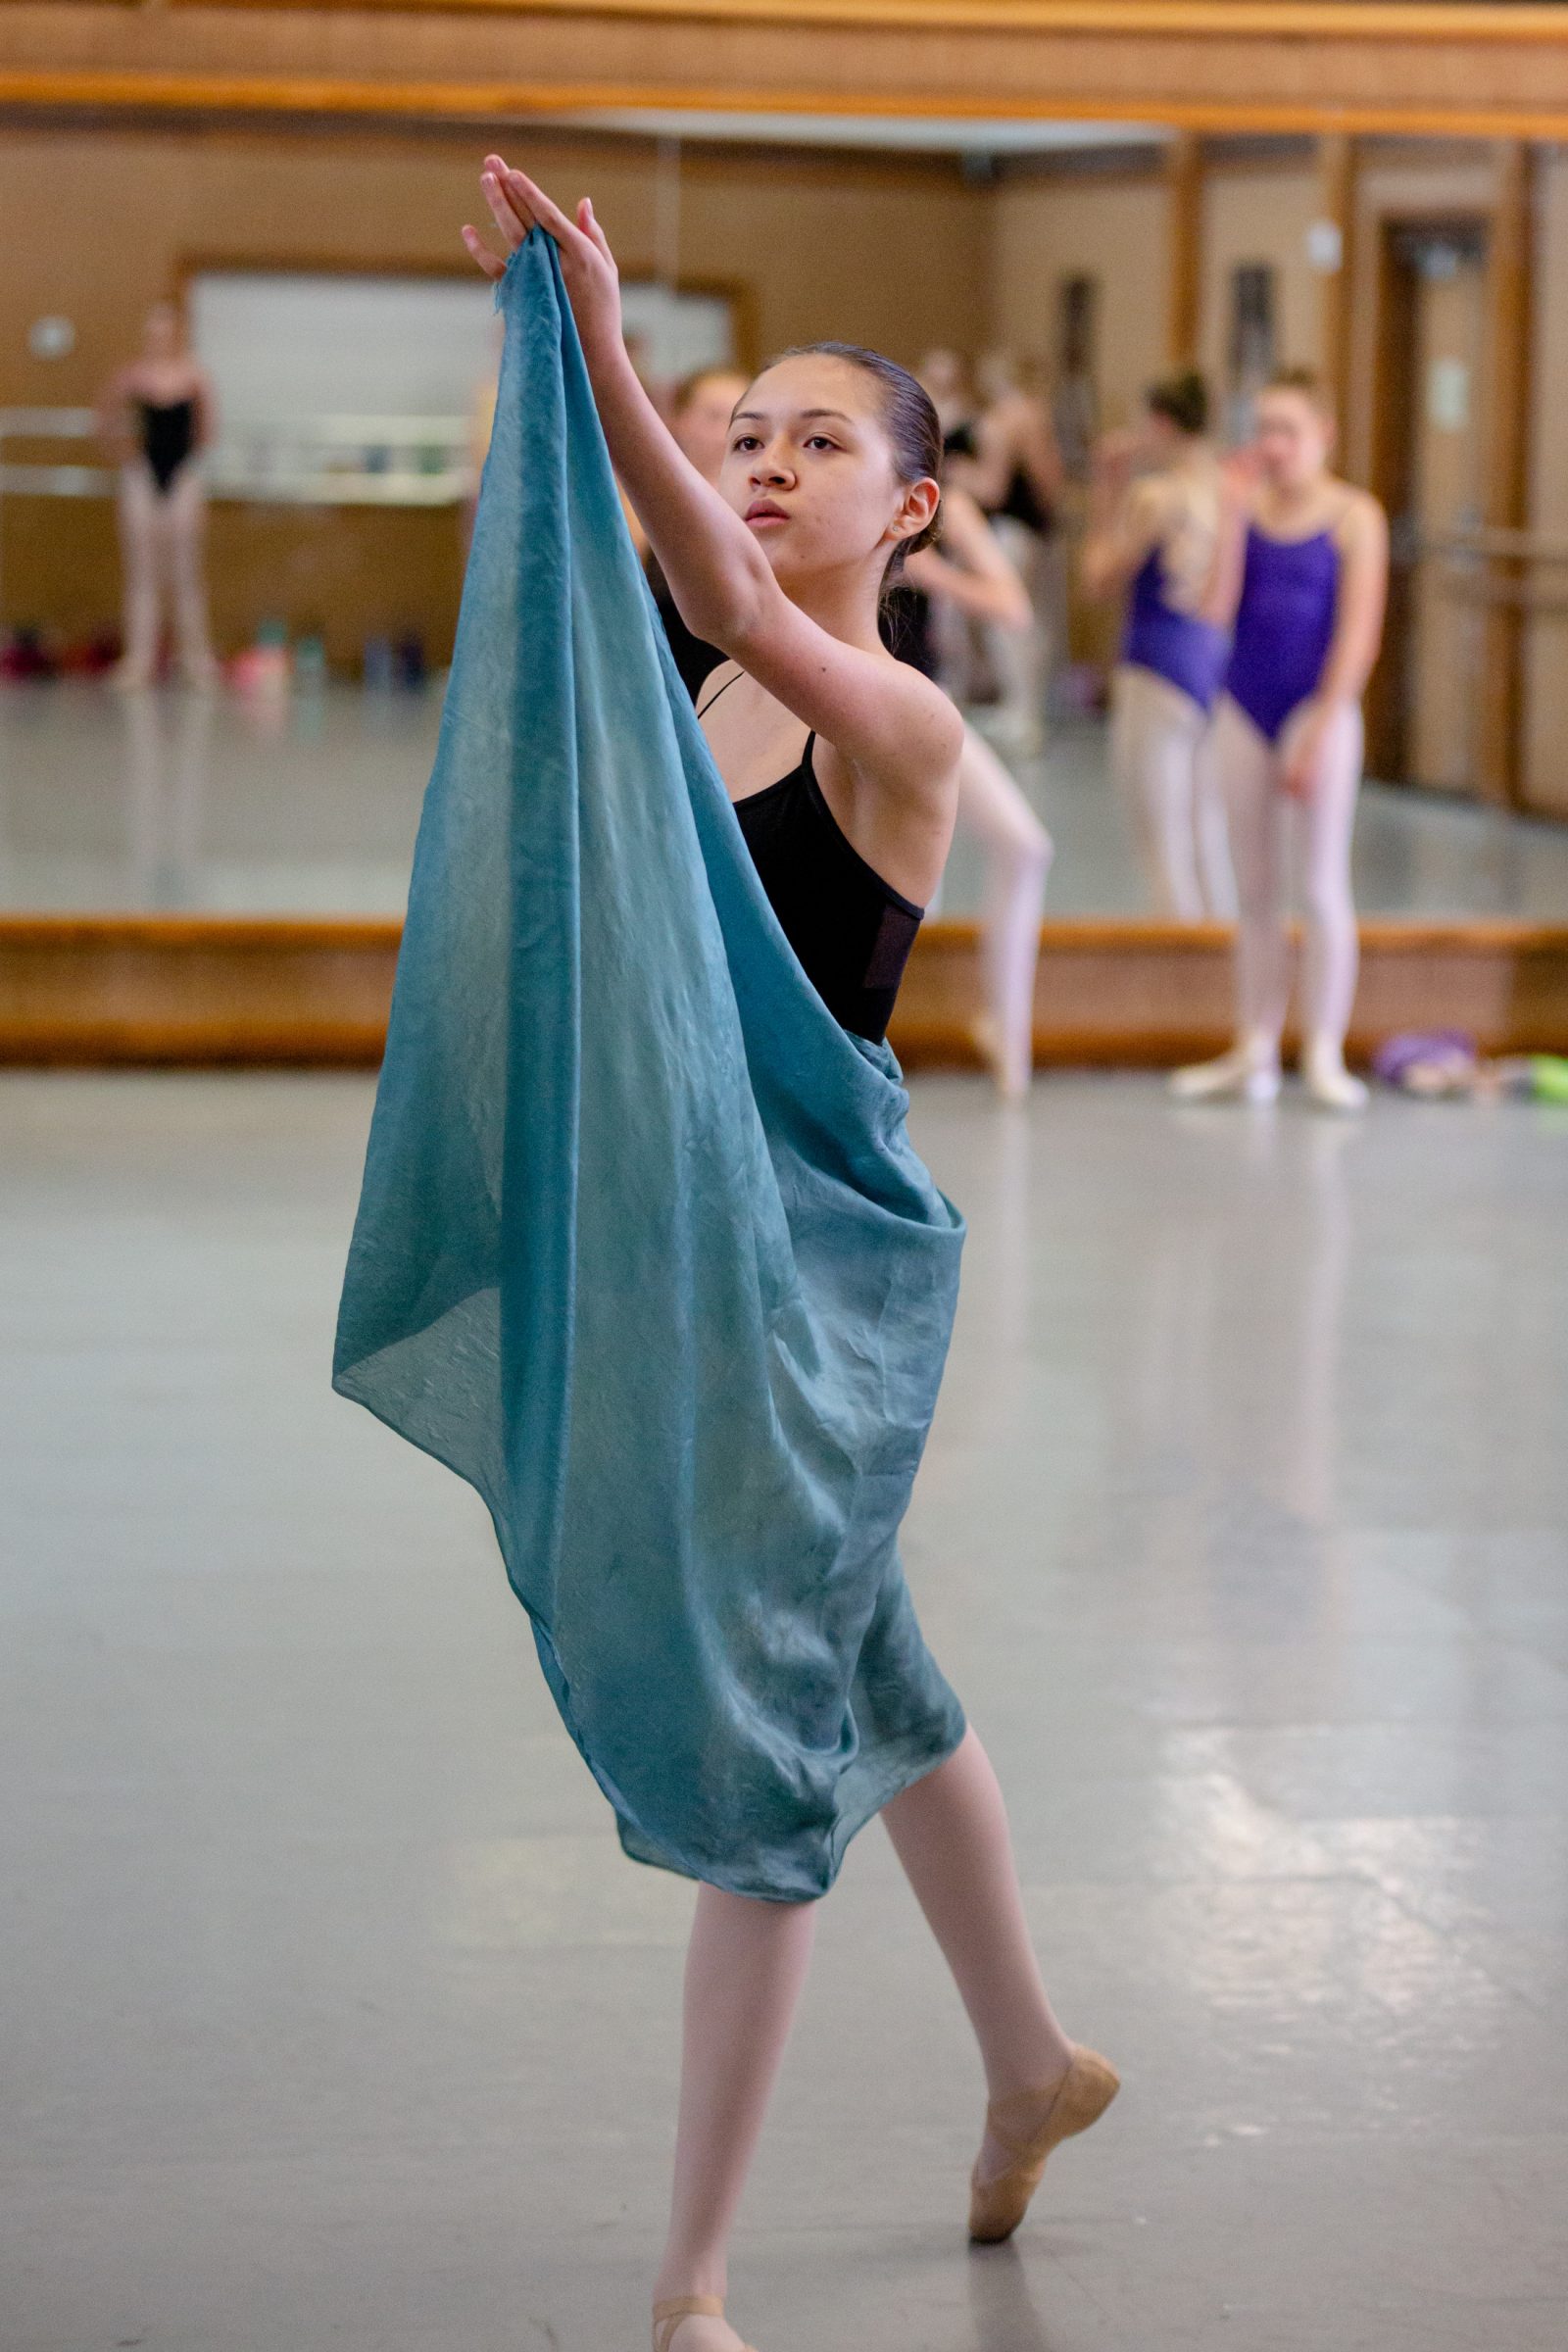 Ballet student holding up the tip of her skirt as part of a rehearsal.